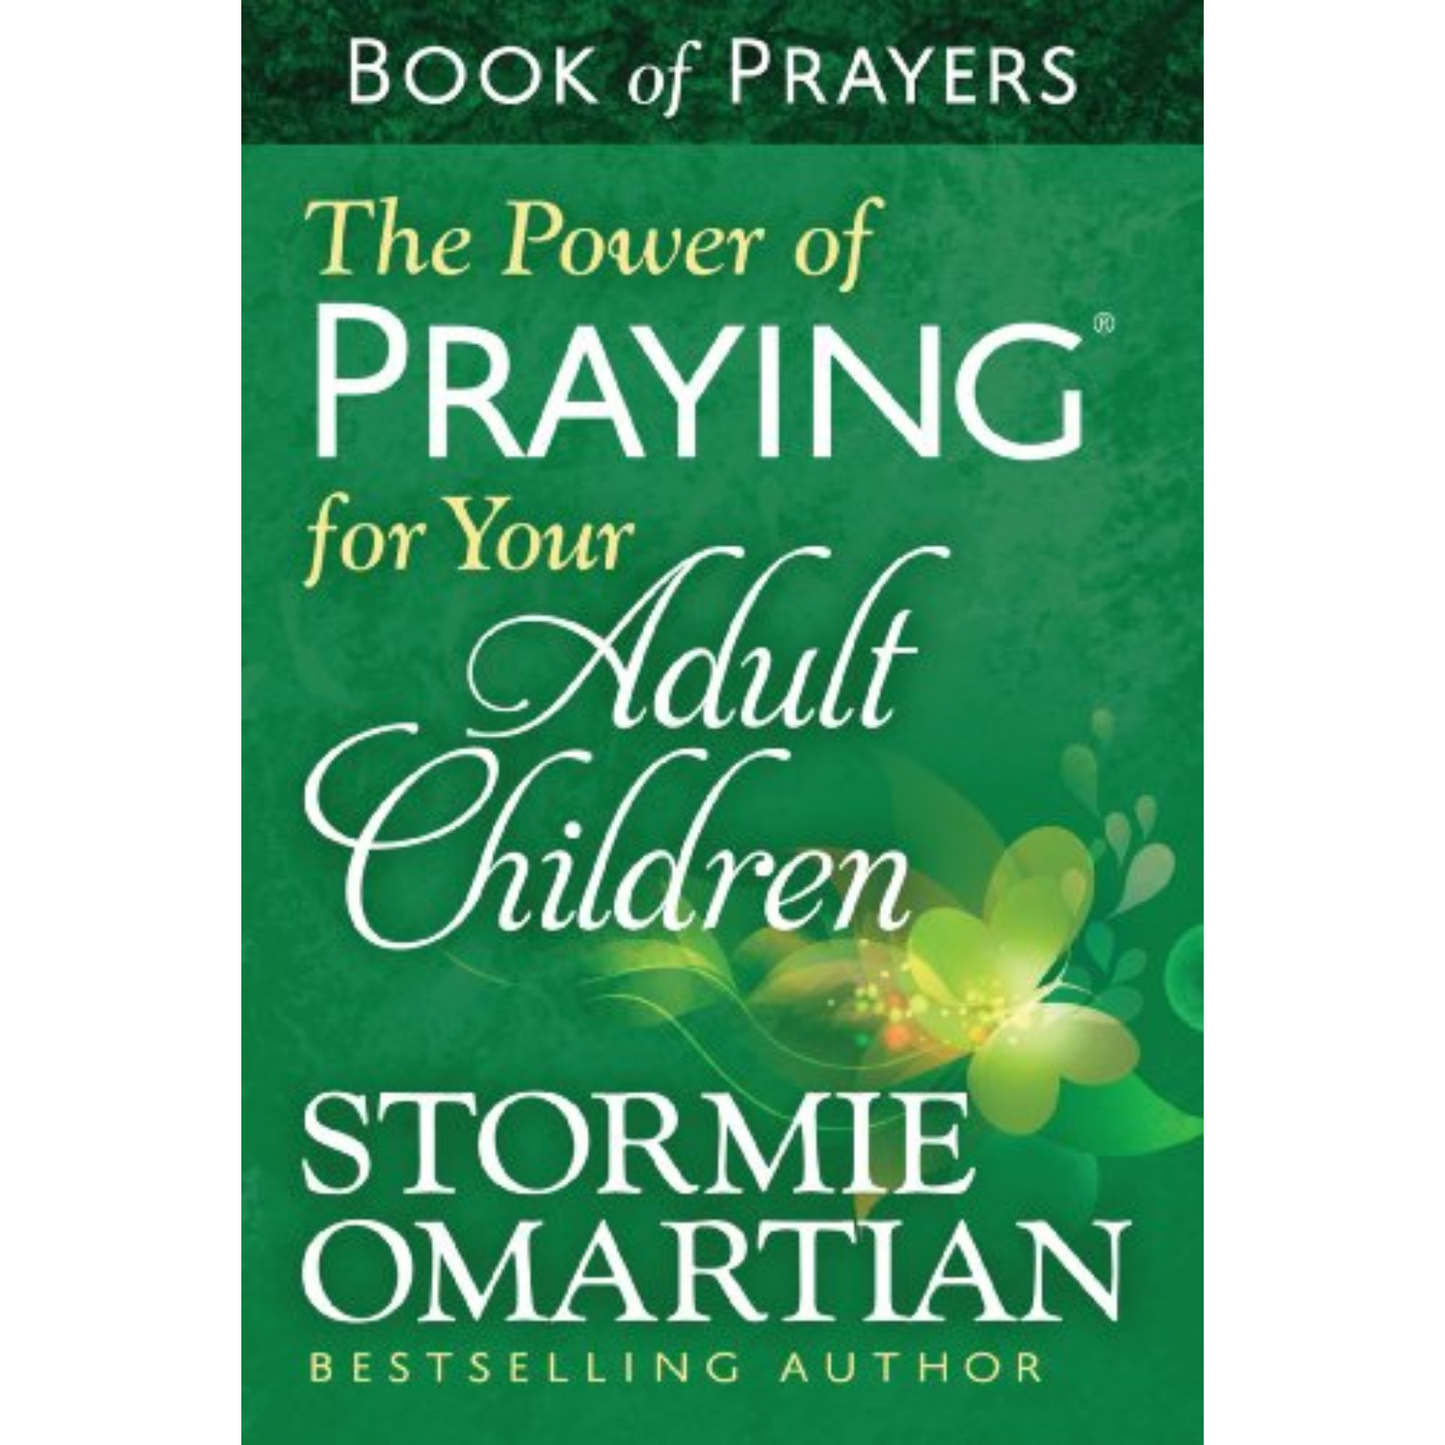 Book Of Prayers: Power Of Praying For Adult Children